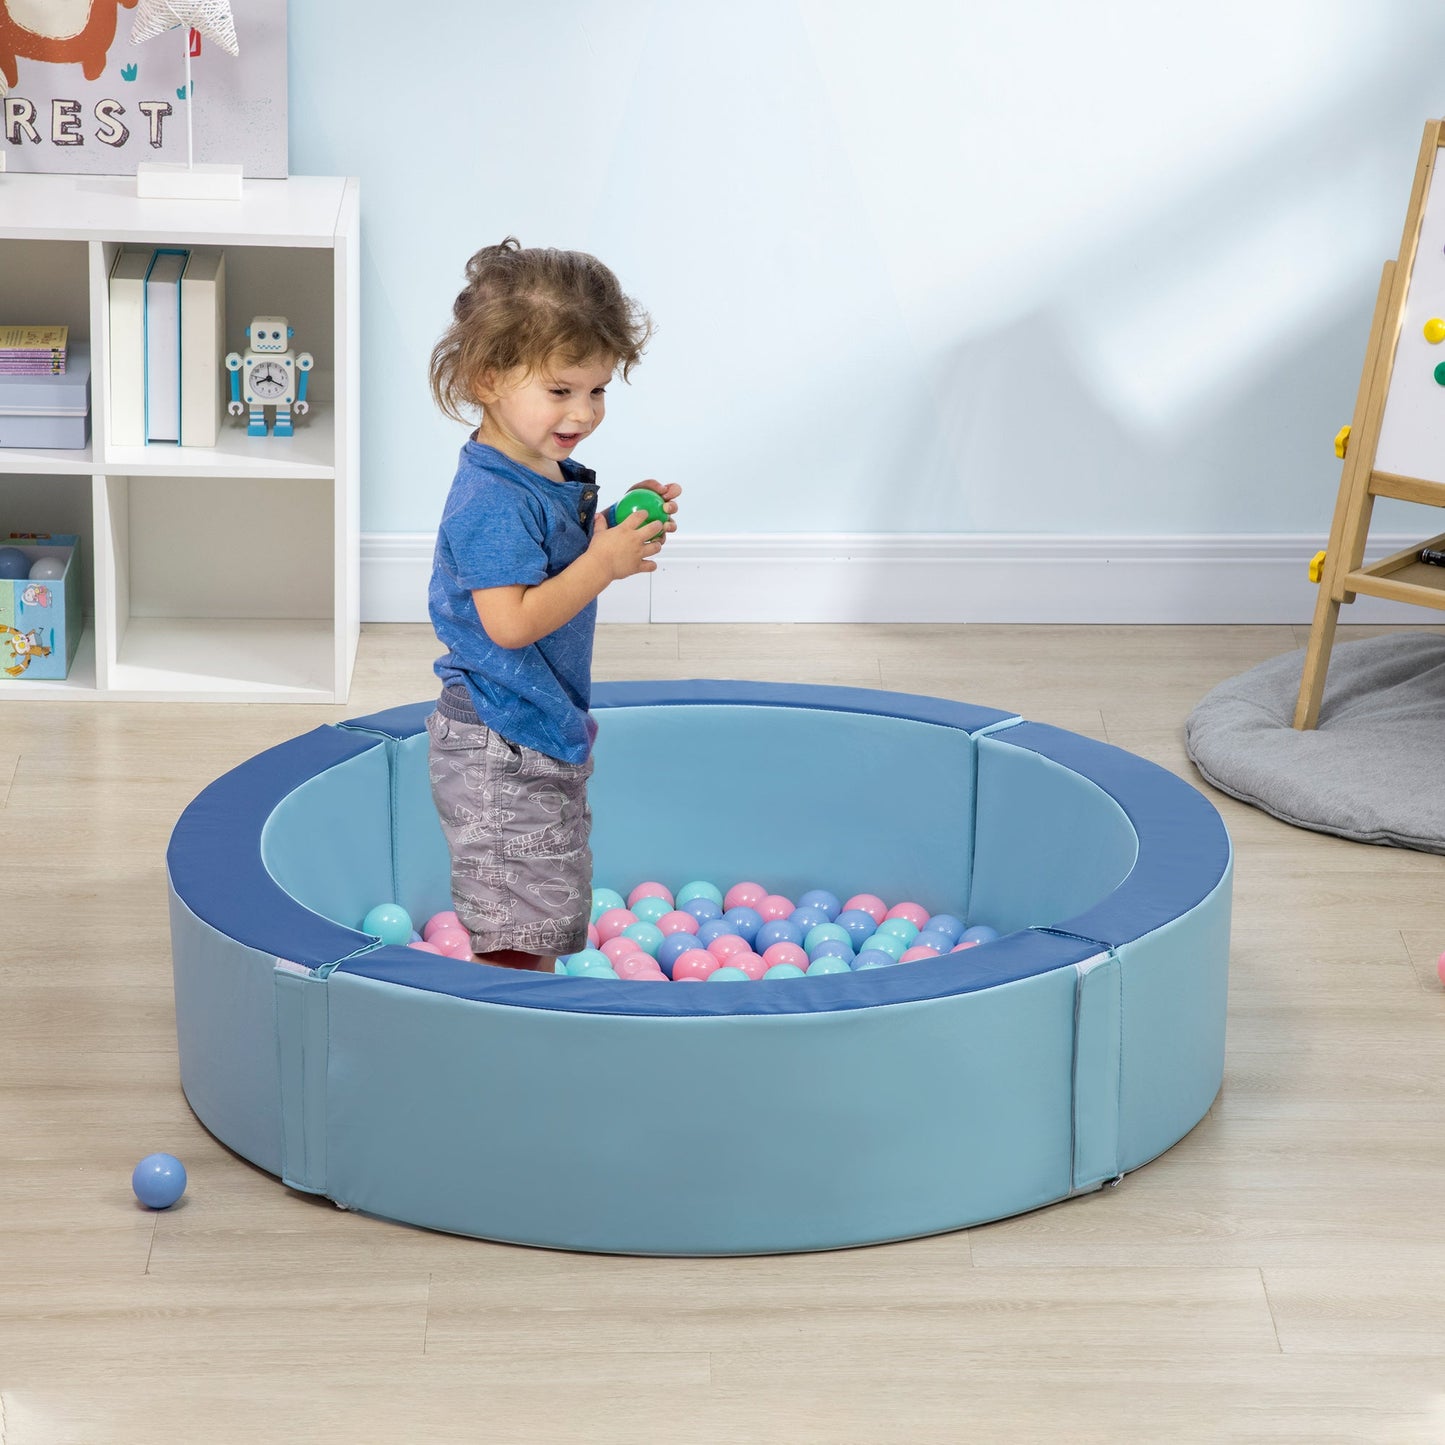 Miscellaneous-Foam Kids Ball Pit Pool with Removable & Washable Cover, 45" x 10" Round Ball Pit for Toddlers with 200 Ocean Balls, Soft Baby Playpen, Blue - Outdoor Style Company